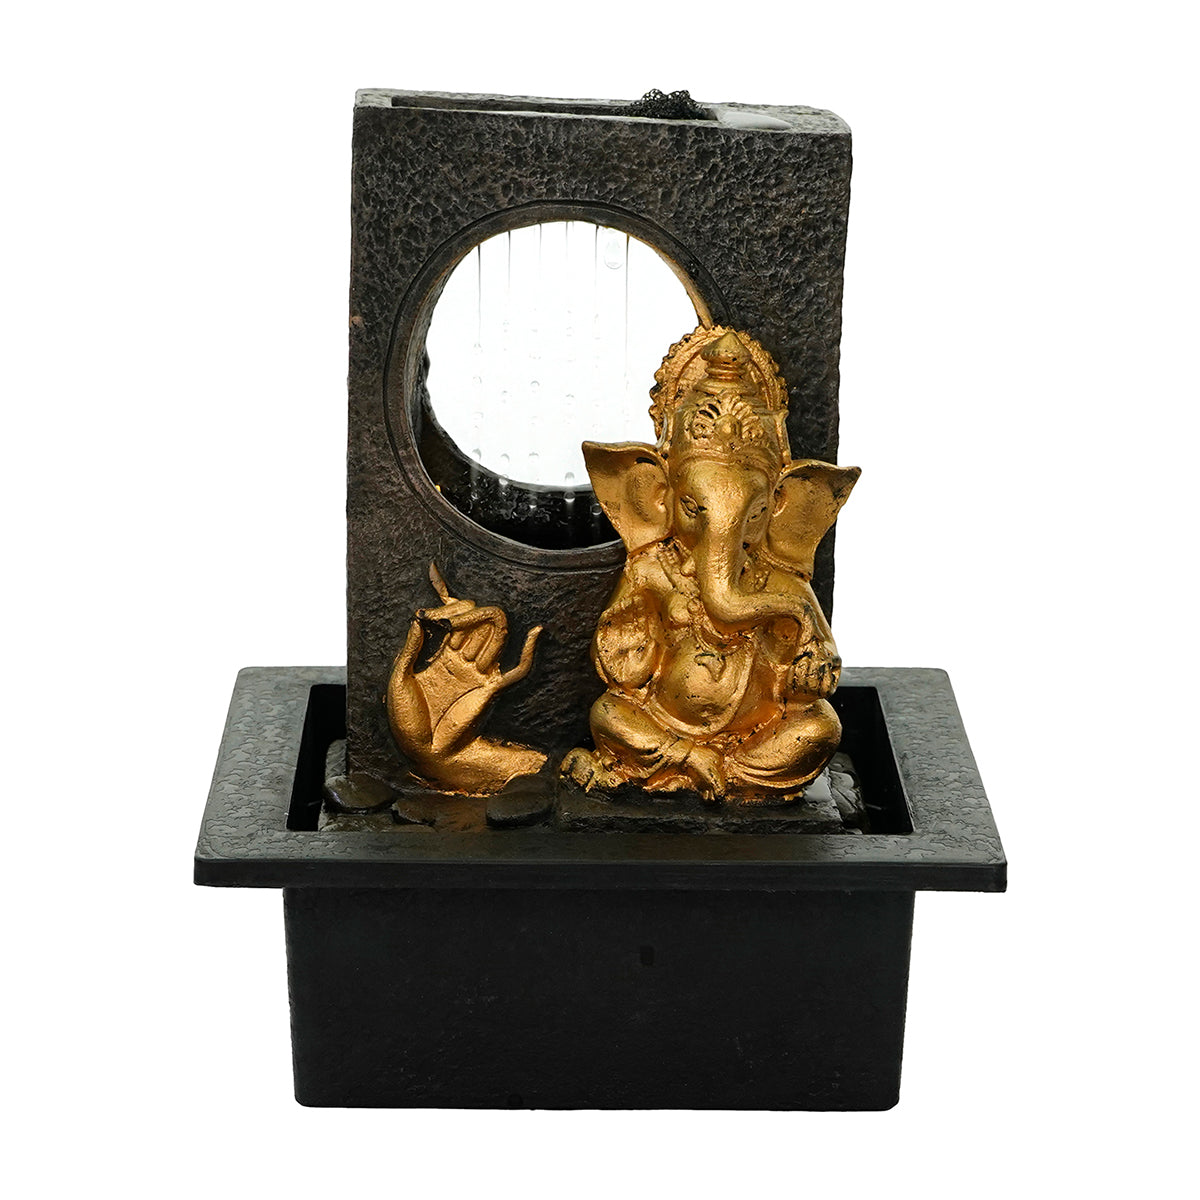 Polystone Black and Golden Lord Ganesha Statue Water Fountain With Light Home/Office Decor 1